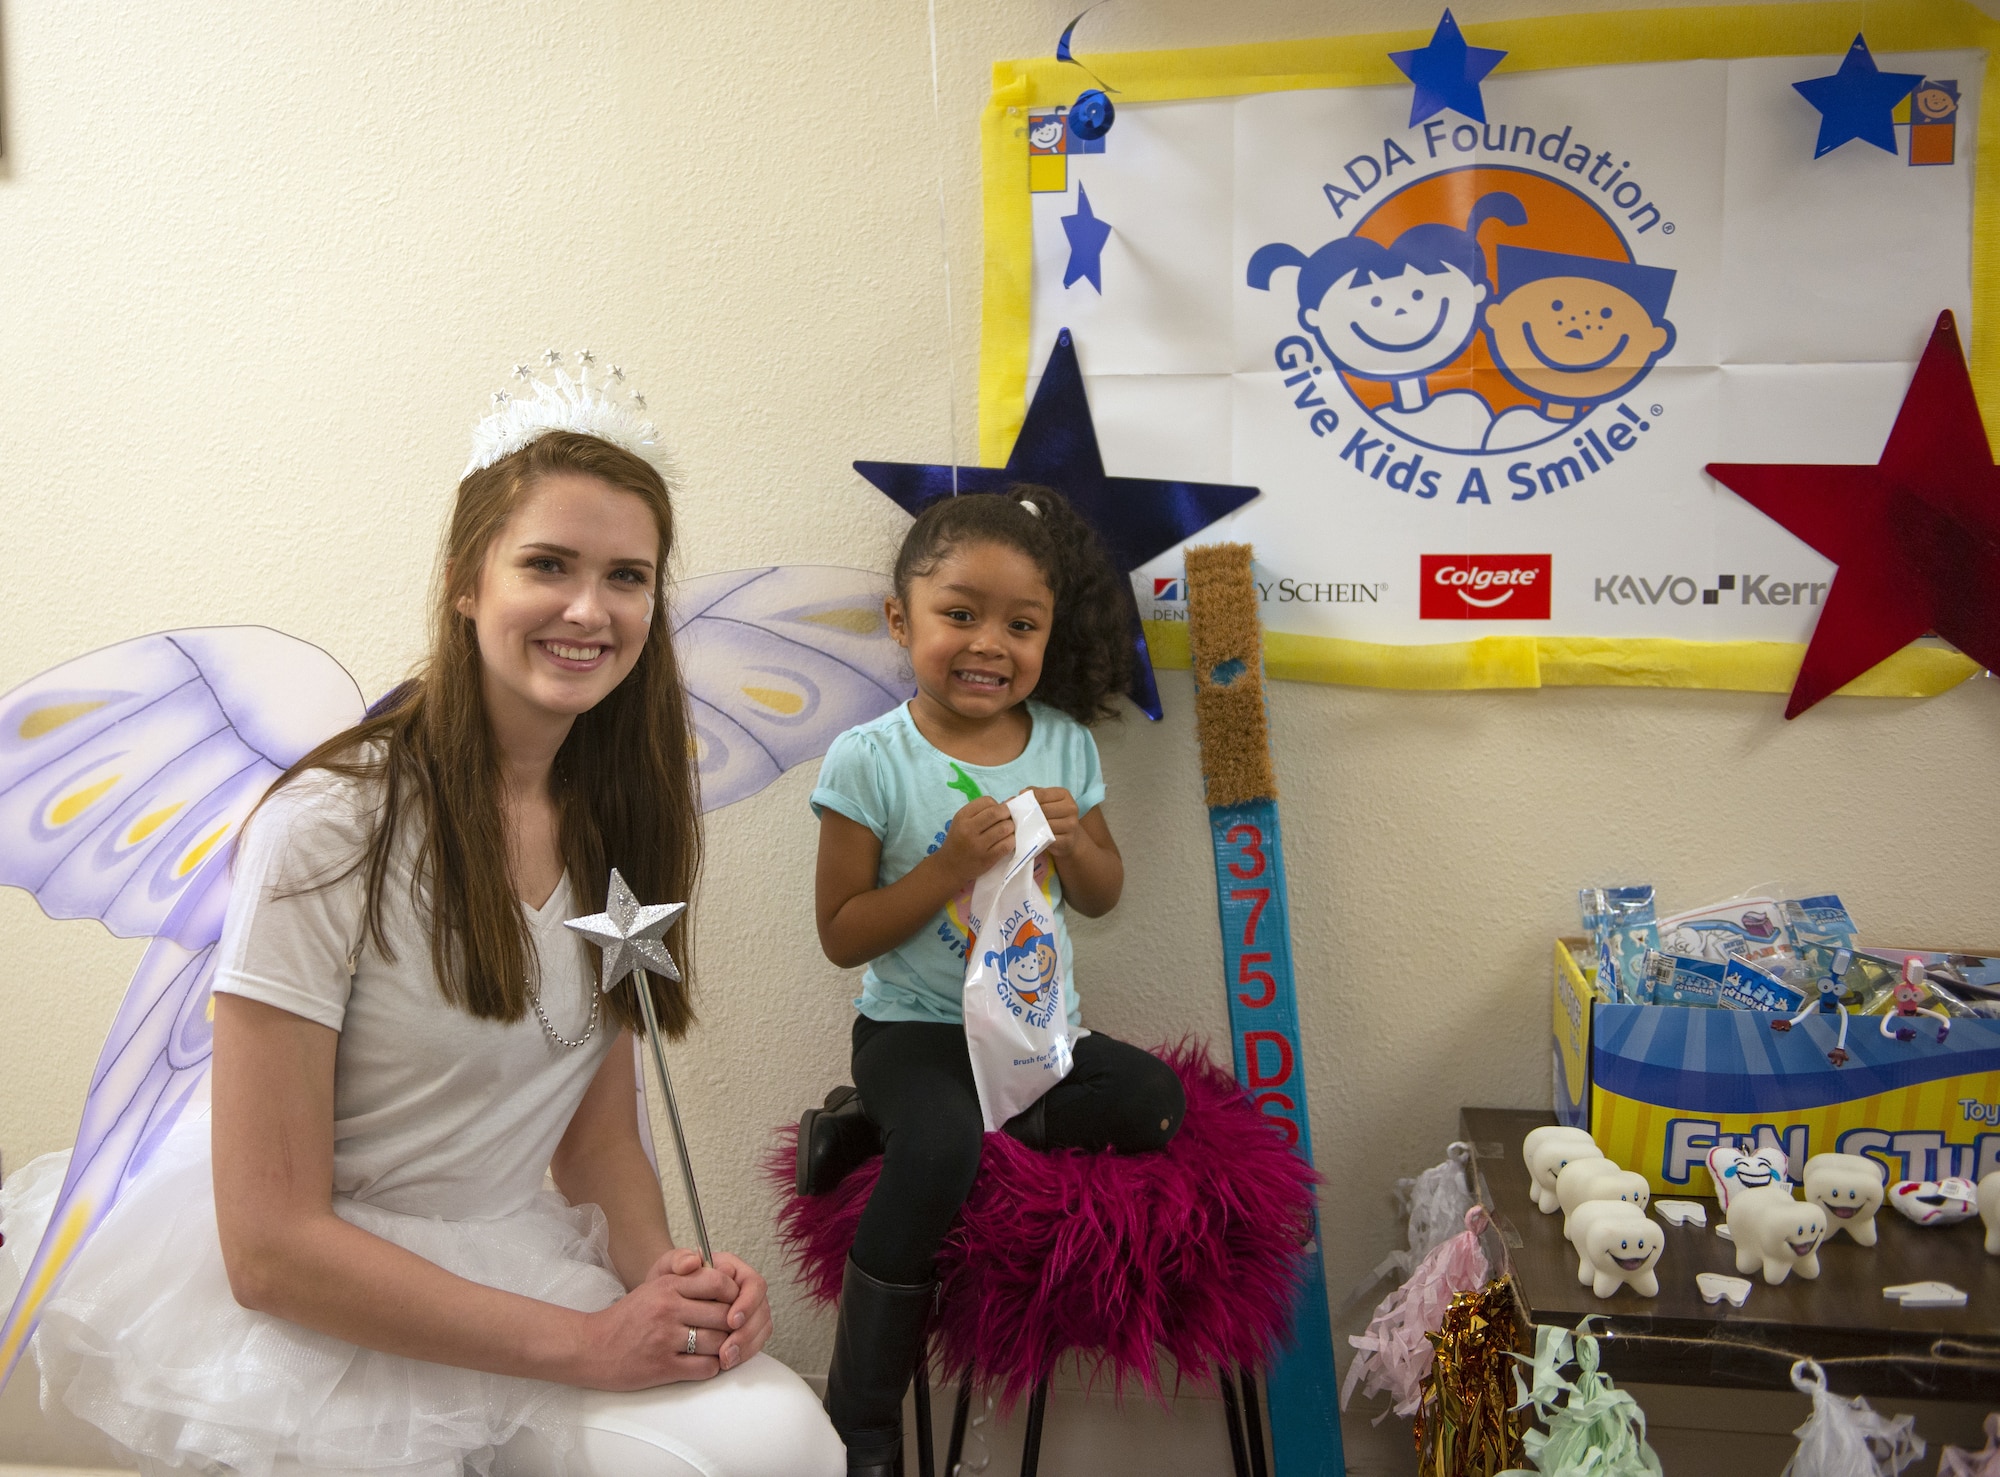 Airman Shaina Nehs, 375th Dental Squadron dental assistant, volunteered to dress up as the “tooth fairy” to provide friendly encouragement to the visiting children before, during, and after their treatment. (U.S. Air Force photo by Airman 1st Class Isaiah Gonzalez)